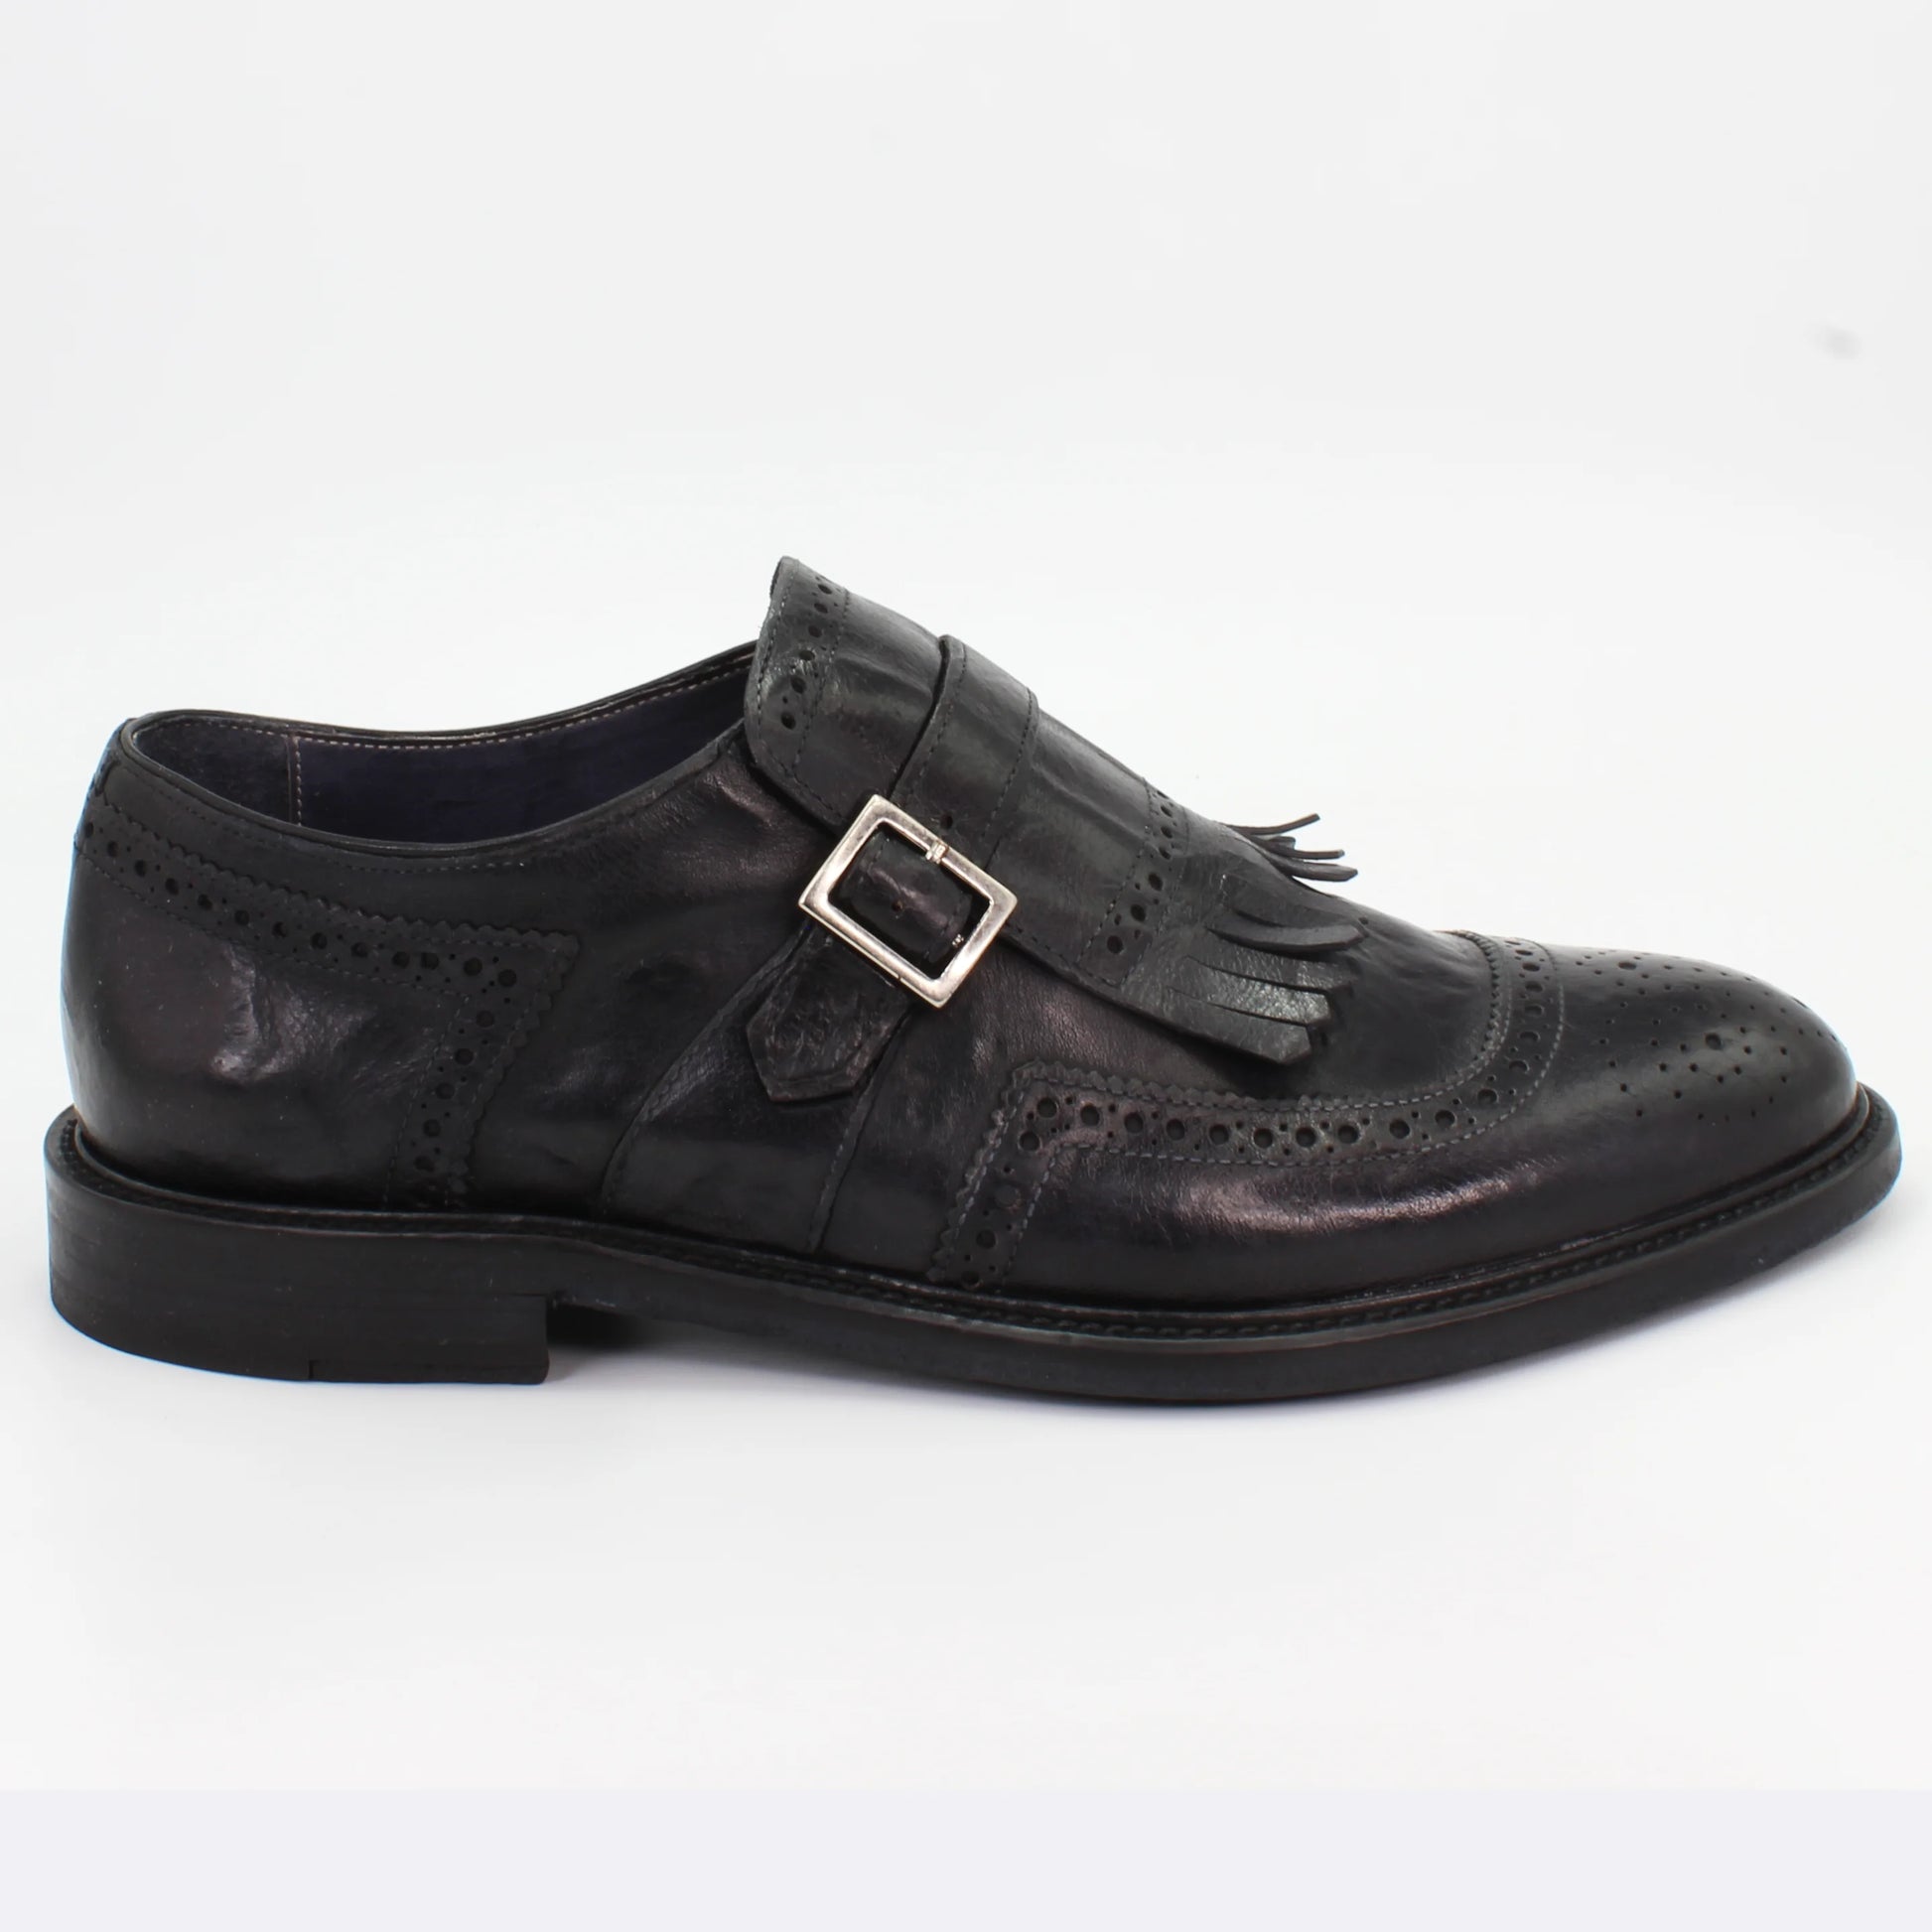 Shop Handmade Italian Leather buckle mocassin in black (BRU11272) or browse our range of hand-made Italian shoes for men in leather or suede in-store at Aliverti Cape Town, or shop online. We deliver in South Africa & offer multiple payment plans as well as accept multiple safe & secure payment methods.